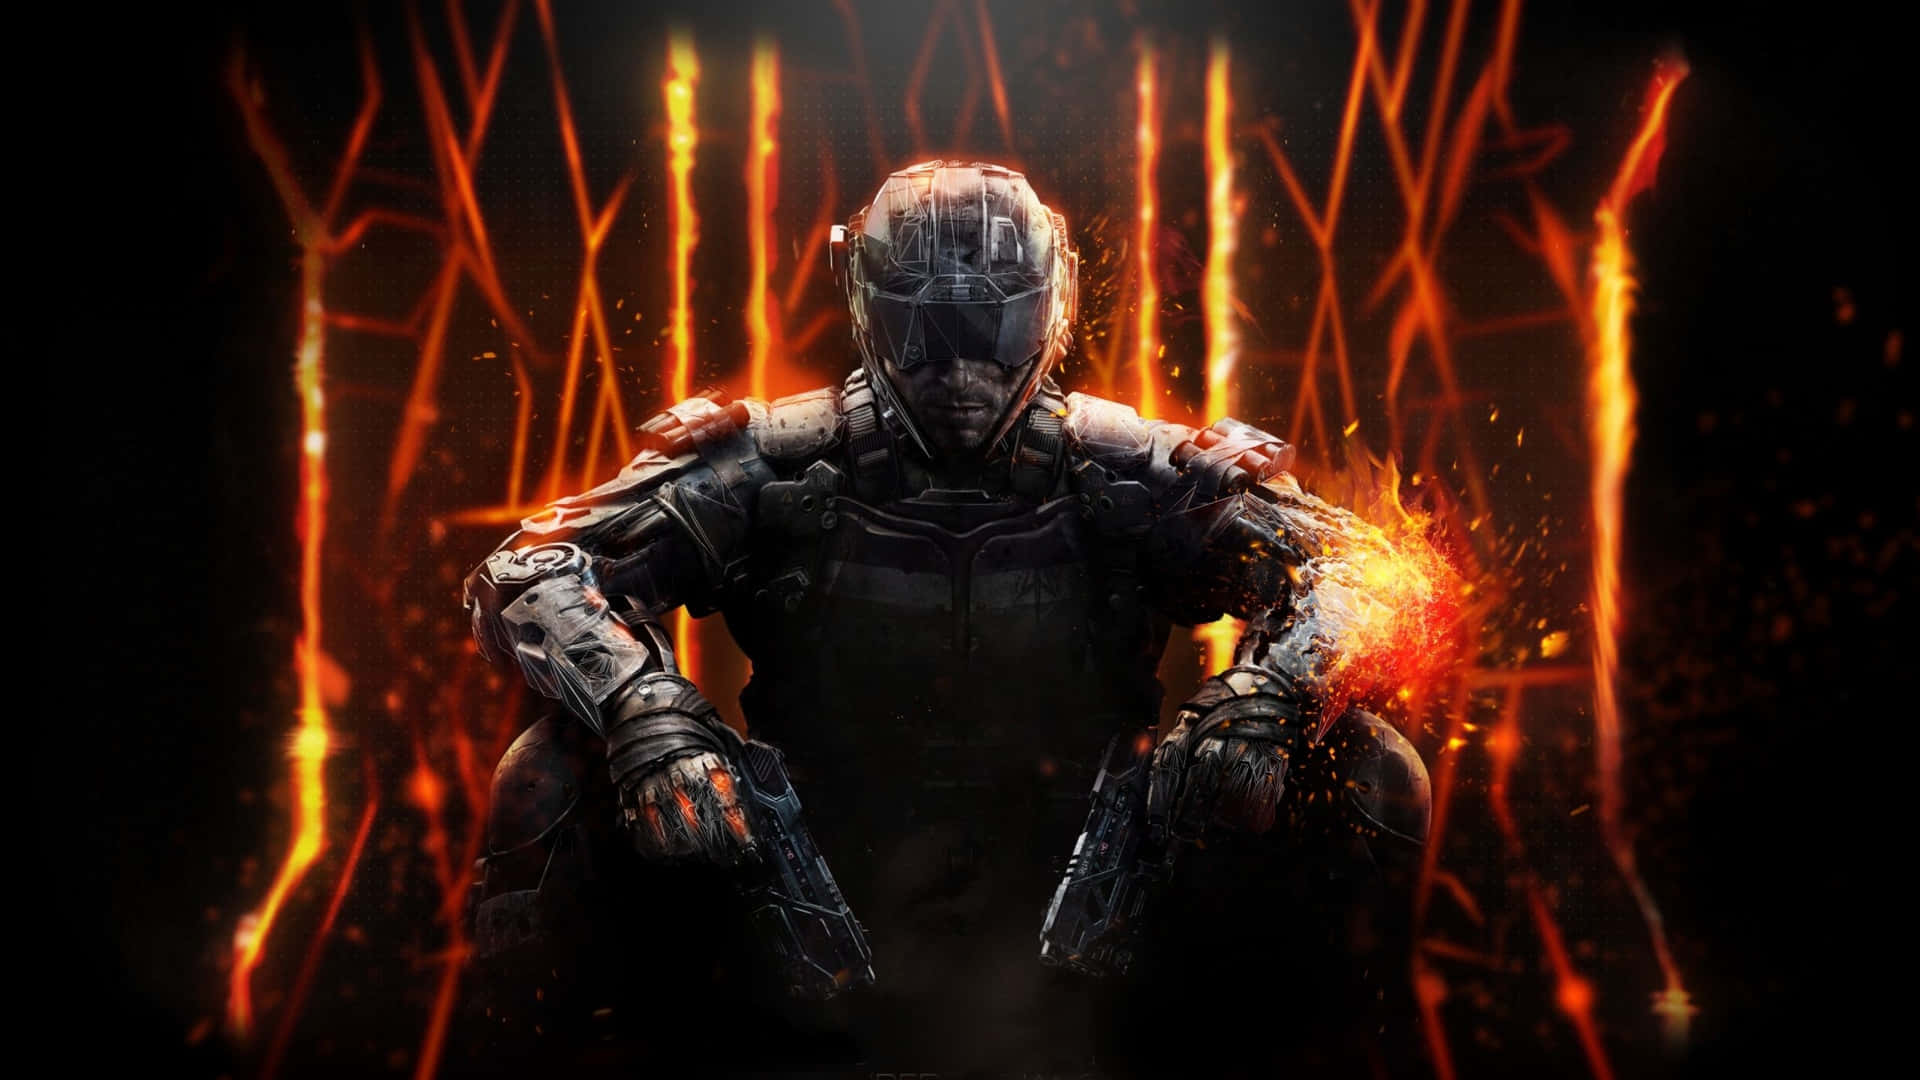 2560 X 1440 Black Ops 2 Burning Armored Player Wallpaper